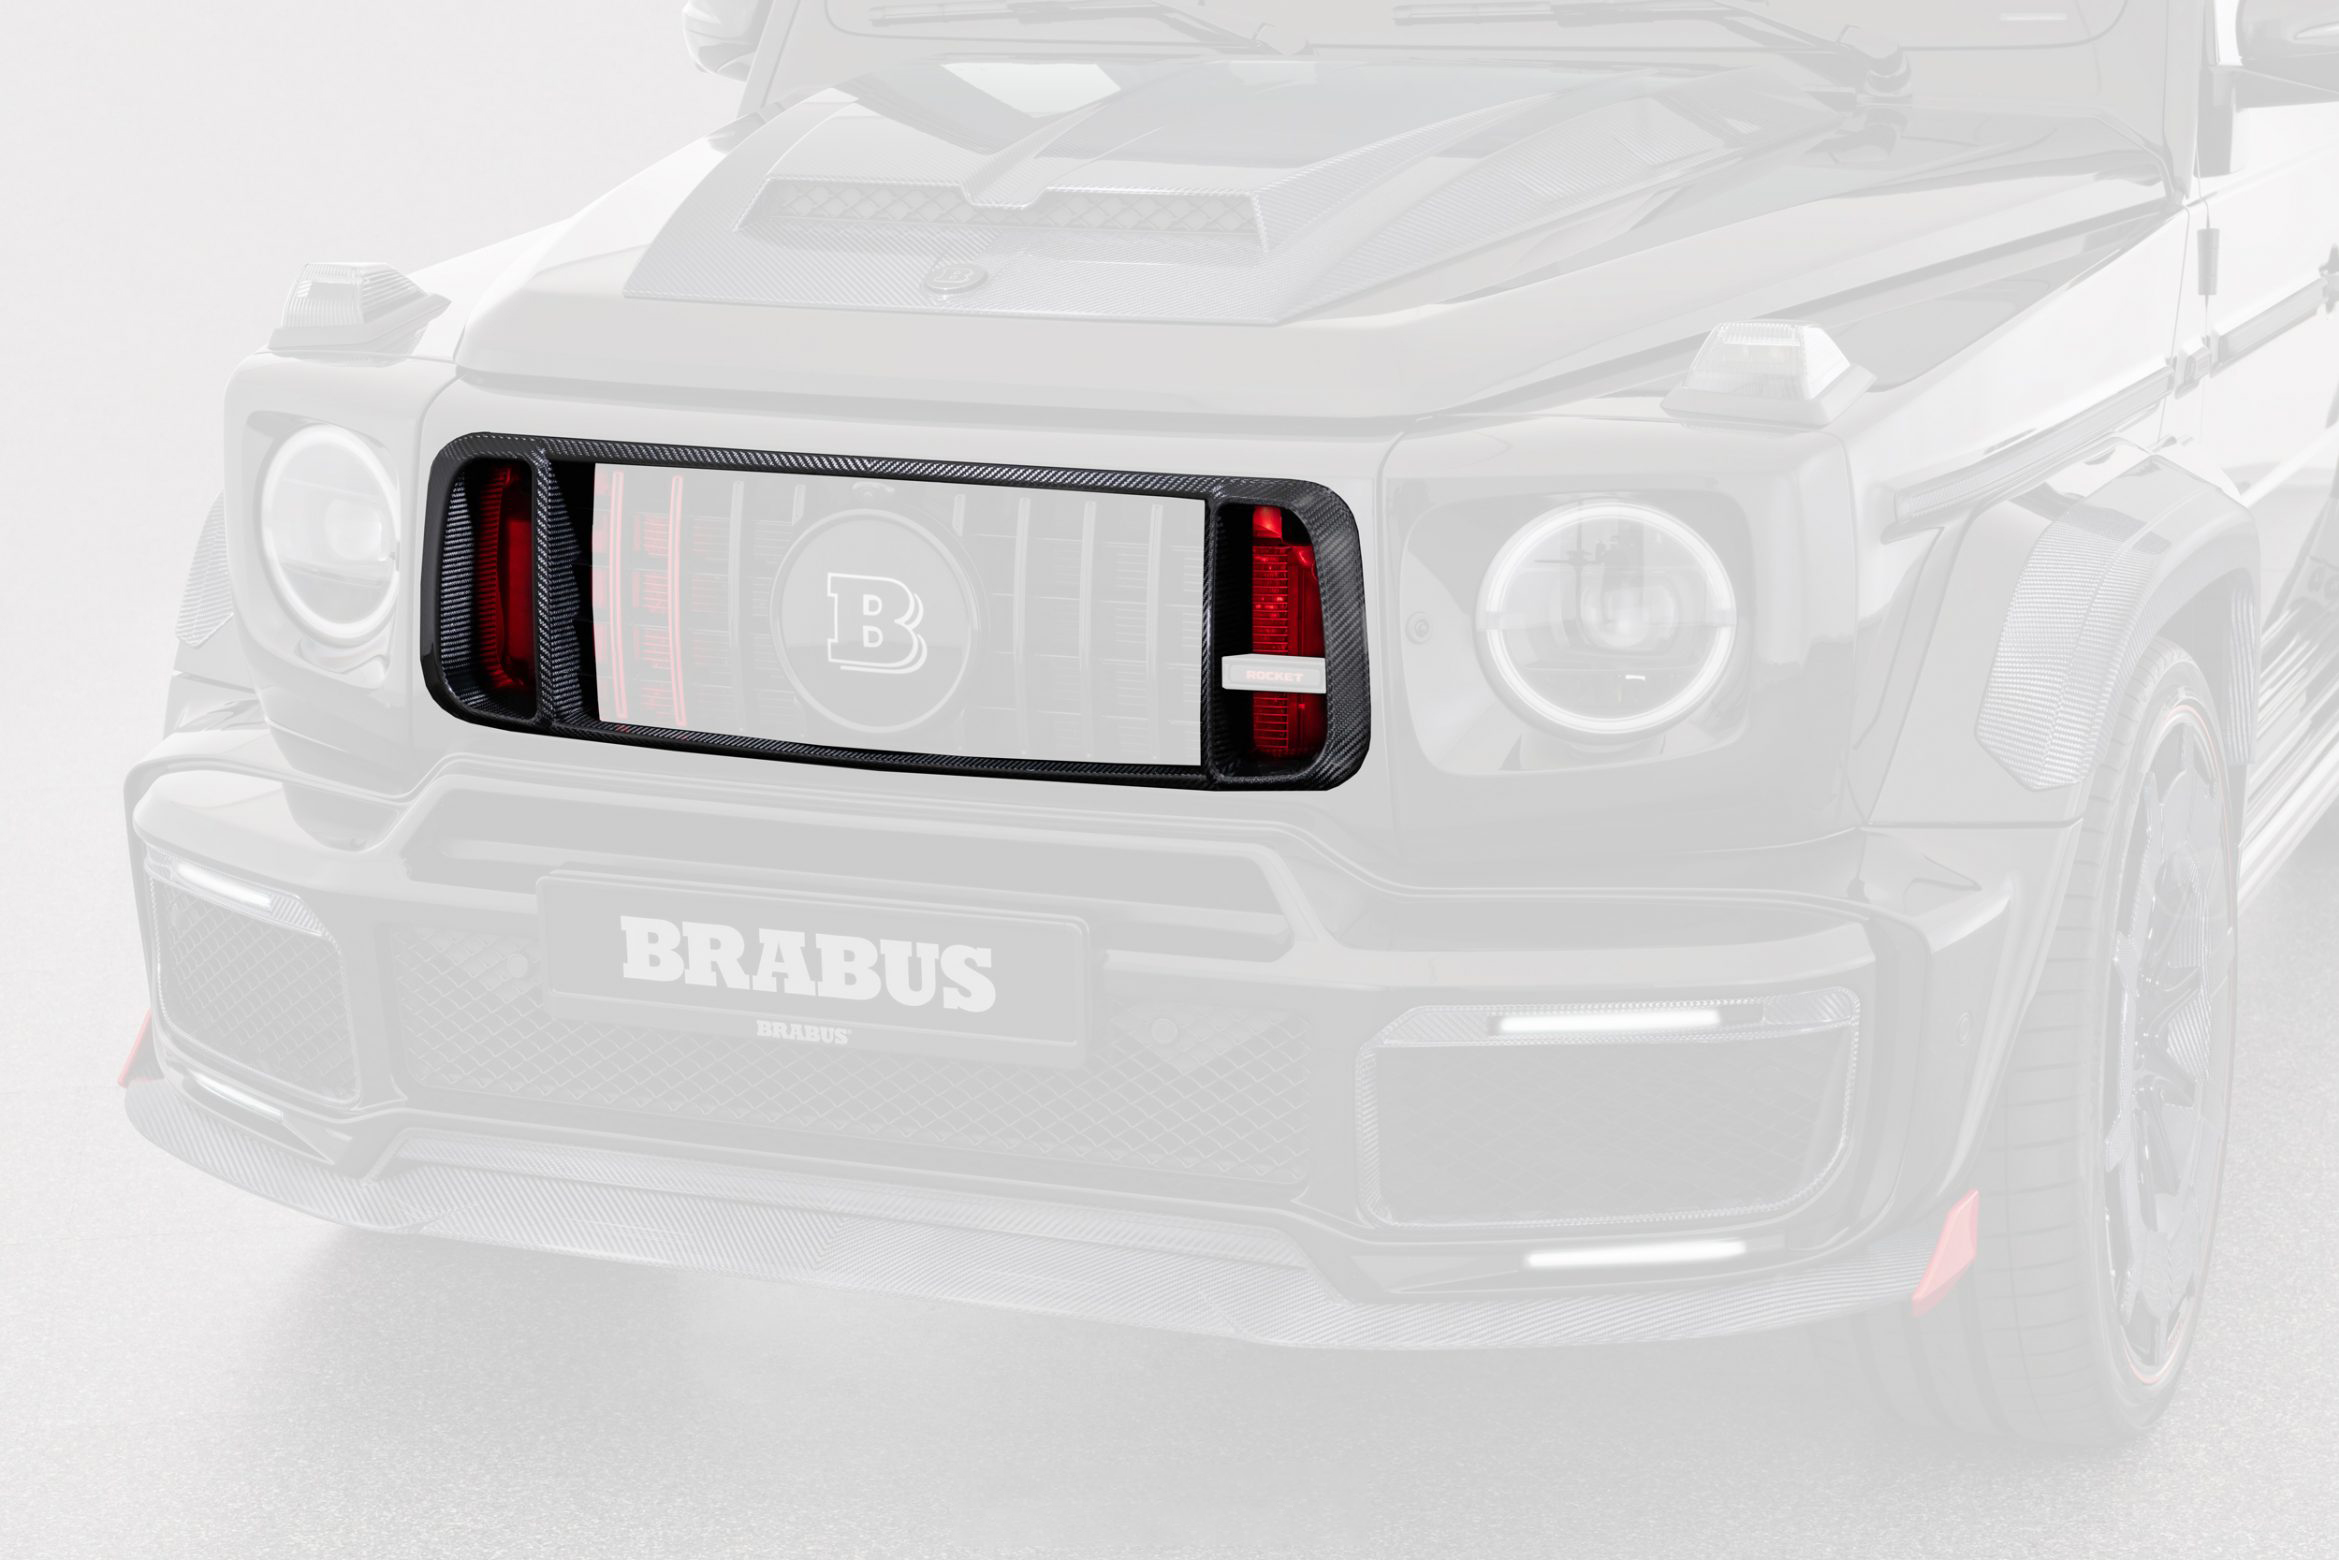 Check price and buy Brabus Rocket body kit for G-class